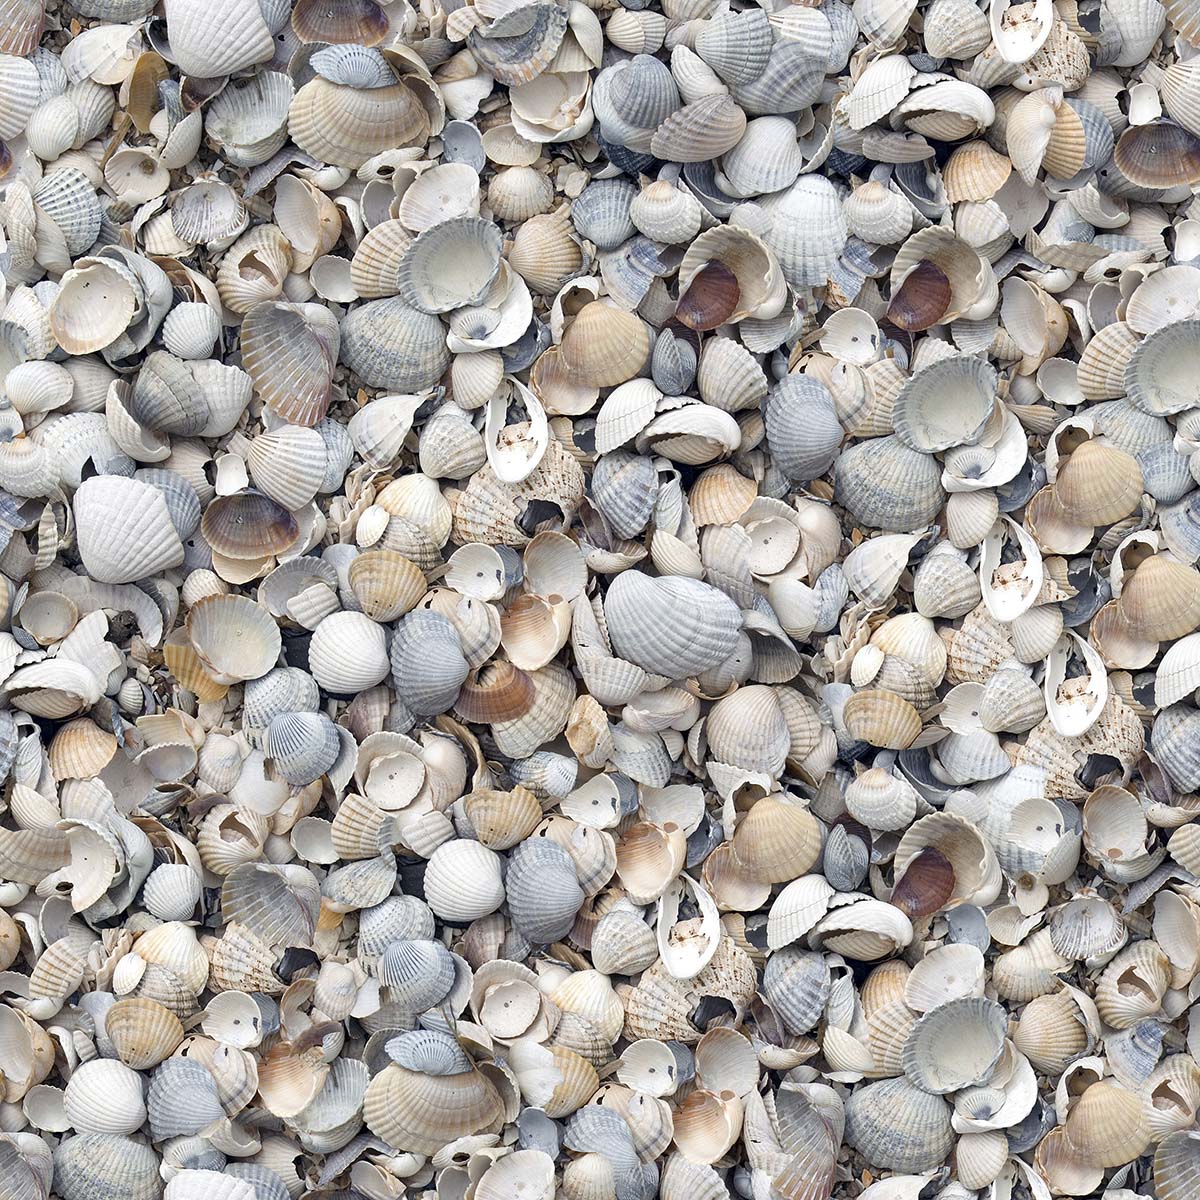 A pile of shells on the ground